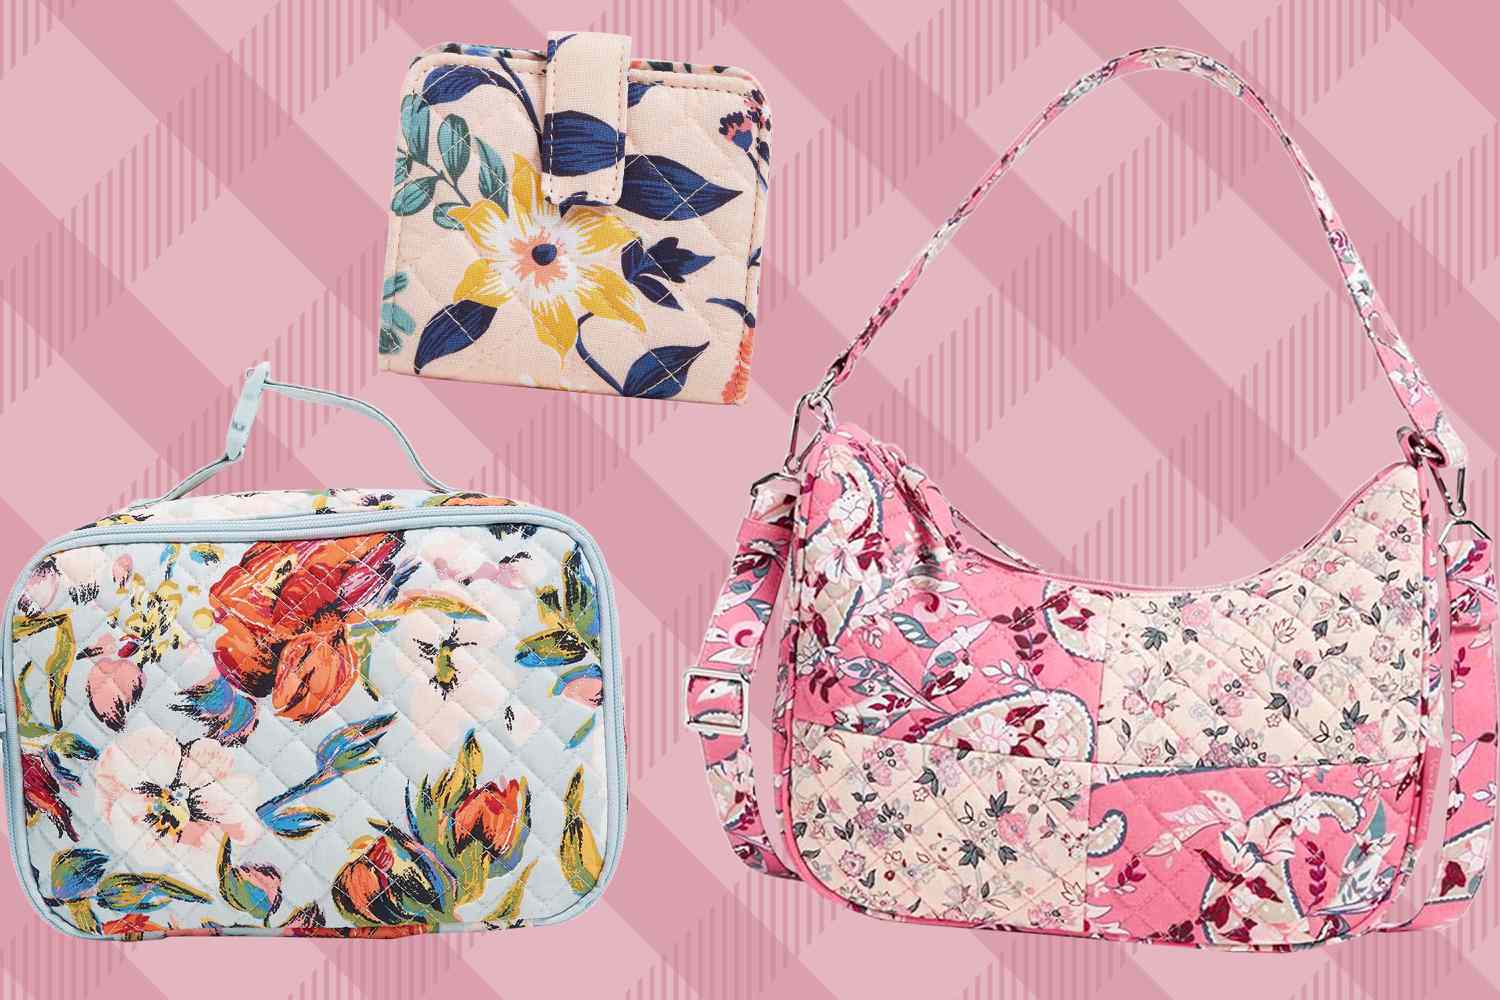 These Vera Bradley Styles Are Perfect For Mother’s Day, And Prices Start At Just $21